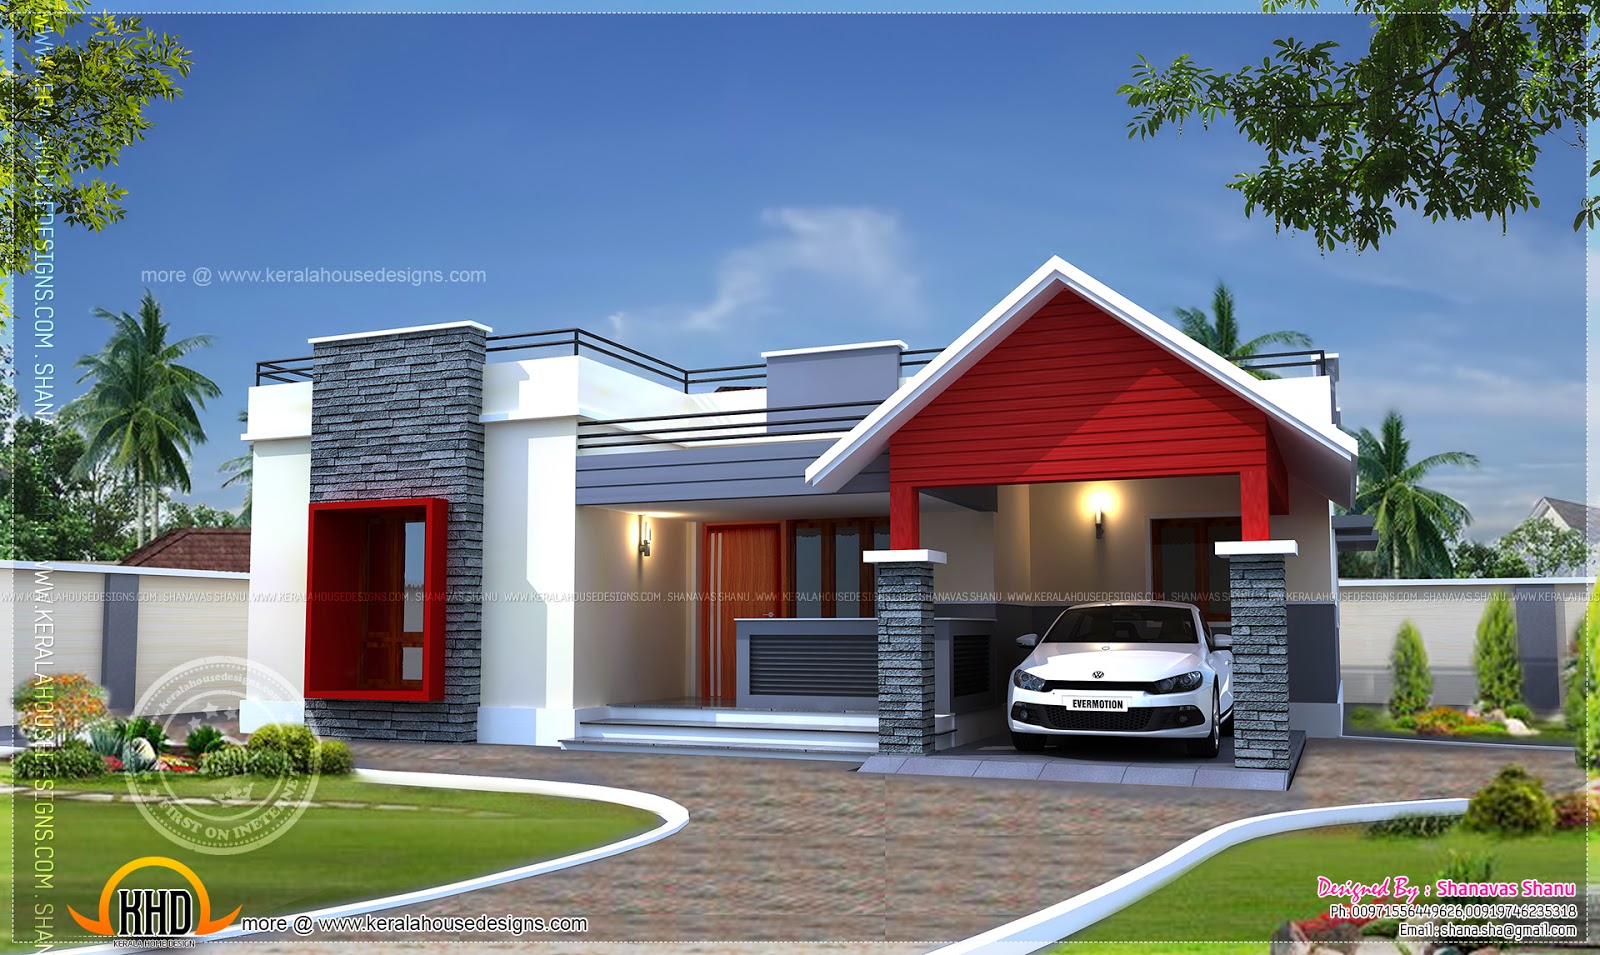 Single floor home plan in 1400 square feet  Kerala home design and floor plans